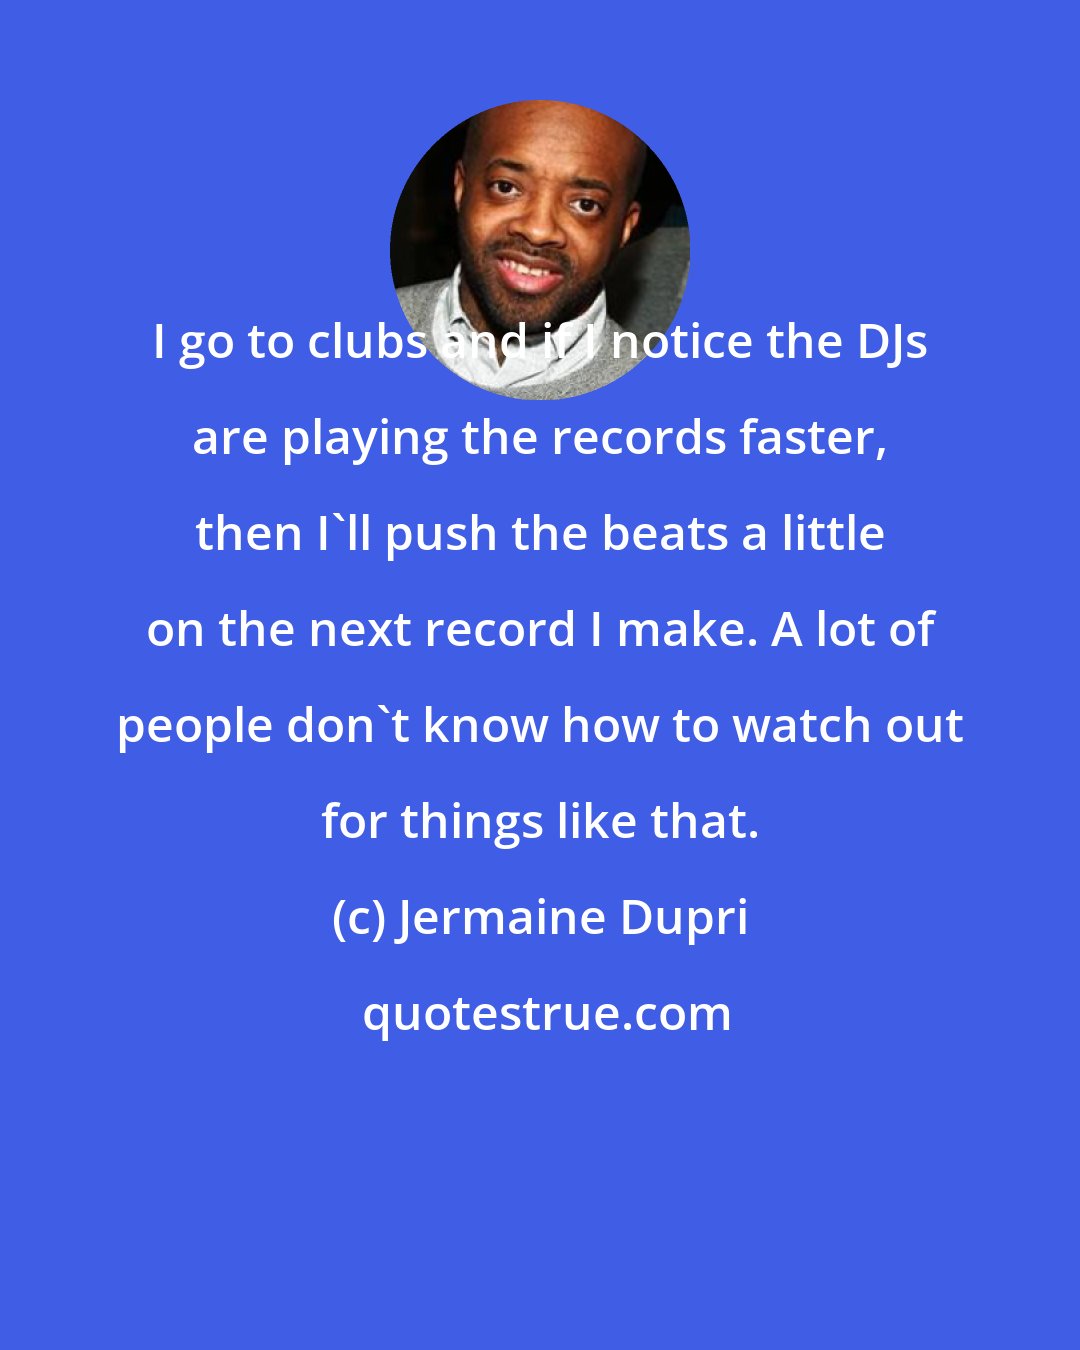 Jermaine Dupri: I go to clubs and if I notice the DJs are playing the records faster, then I'll push the beats a little on the next record I make. A lot of people don't know how to watch out for things like that.